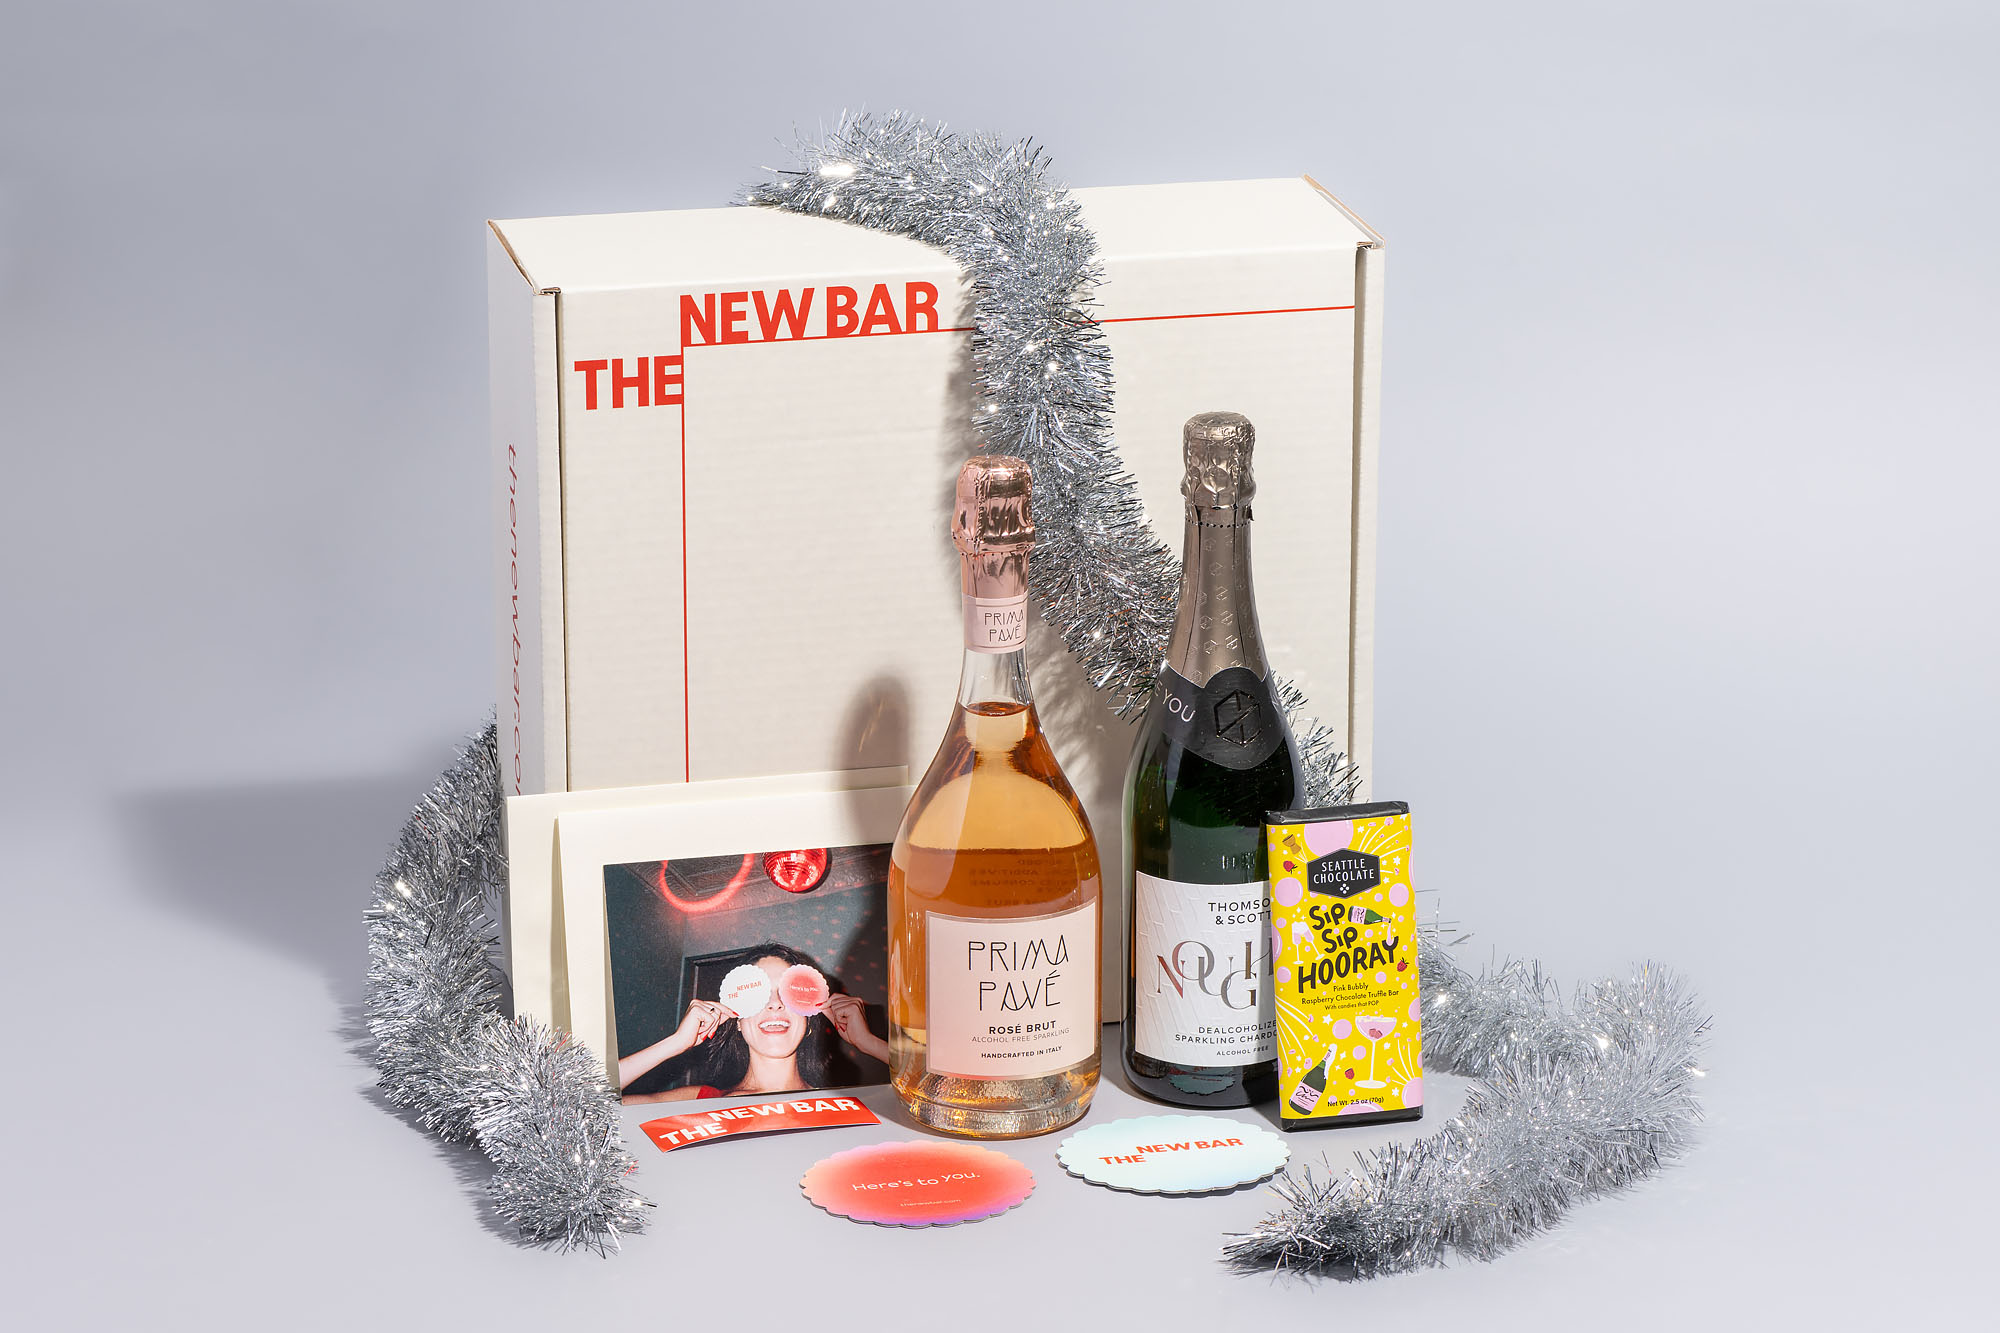 A gift box containing two bottles of sparkling wine and a chocolate bar, wrapped in silver tinsel.